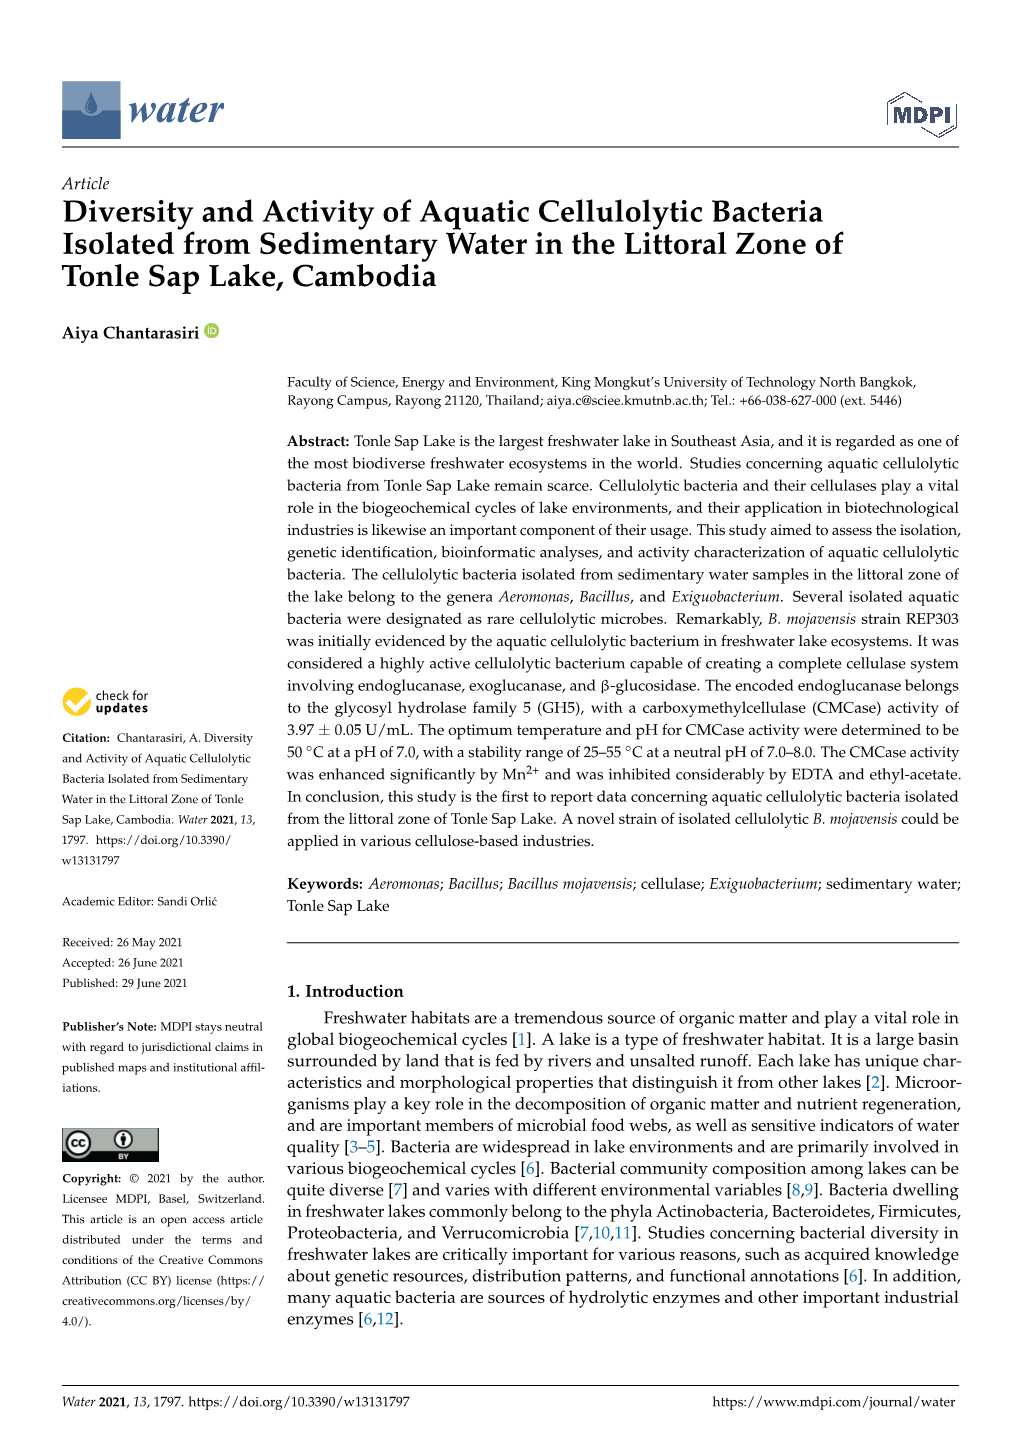 Diversity and Activity of Aquatic Cellulolytic Bacteria Isolated from Sedimentary Water in the Littoral Zone of Tonle Sap Lake, Cambodia